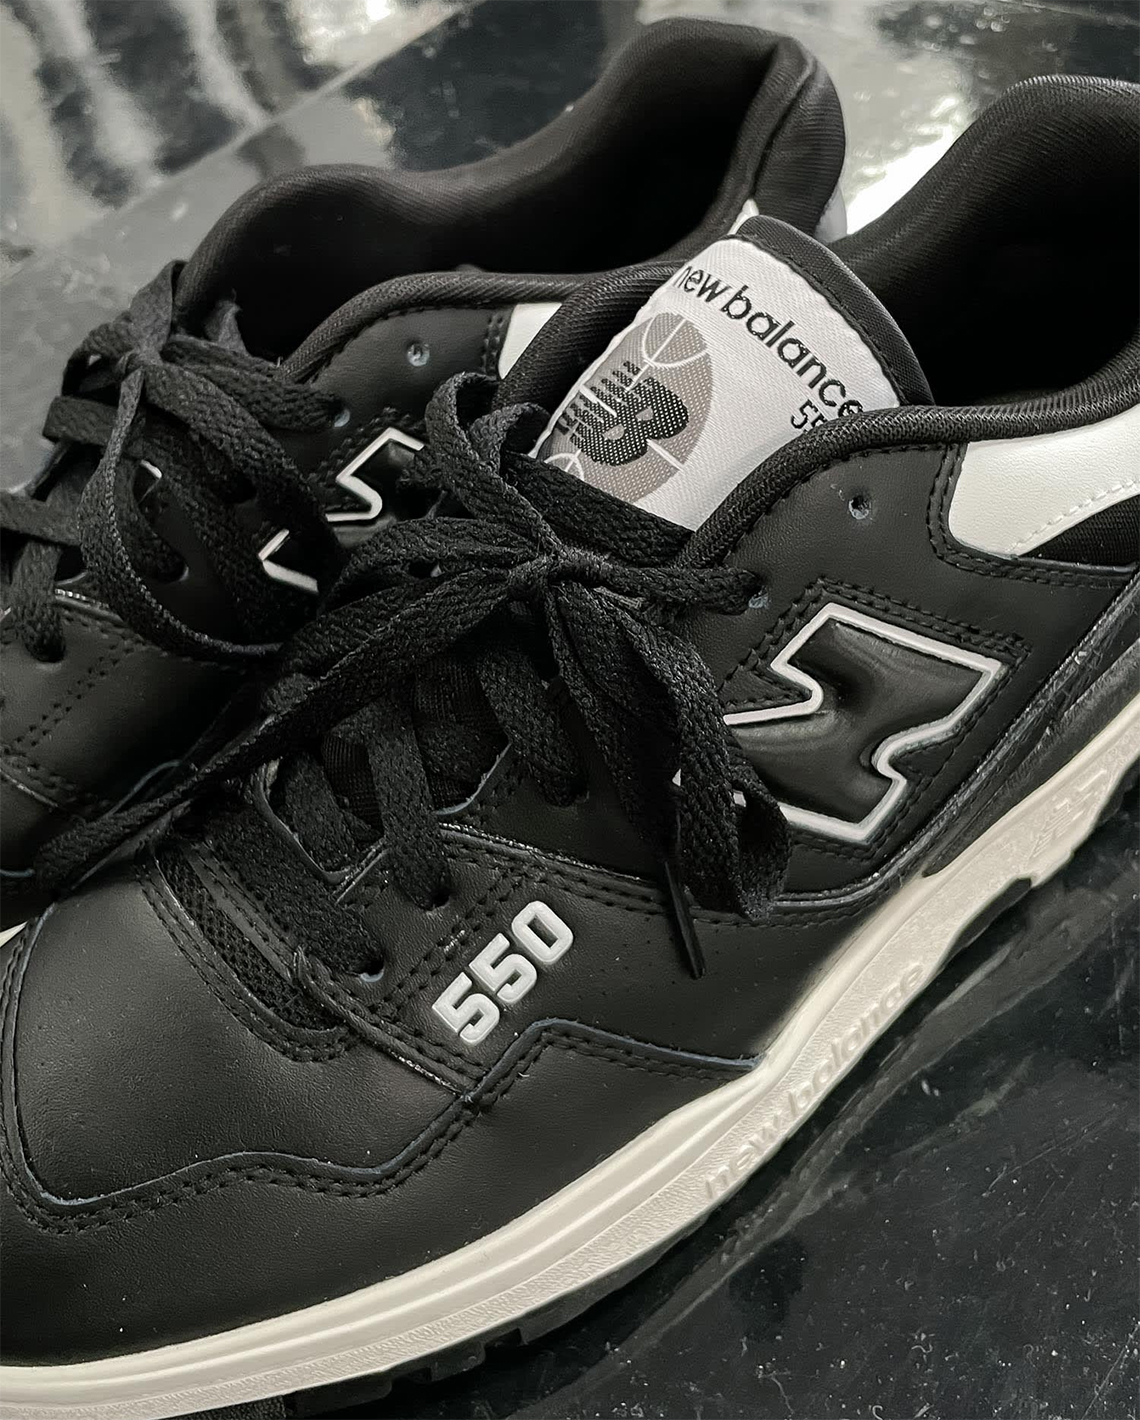 Comme des Garcons CdGH New Balance 550 Release Info | SneakerNews.com